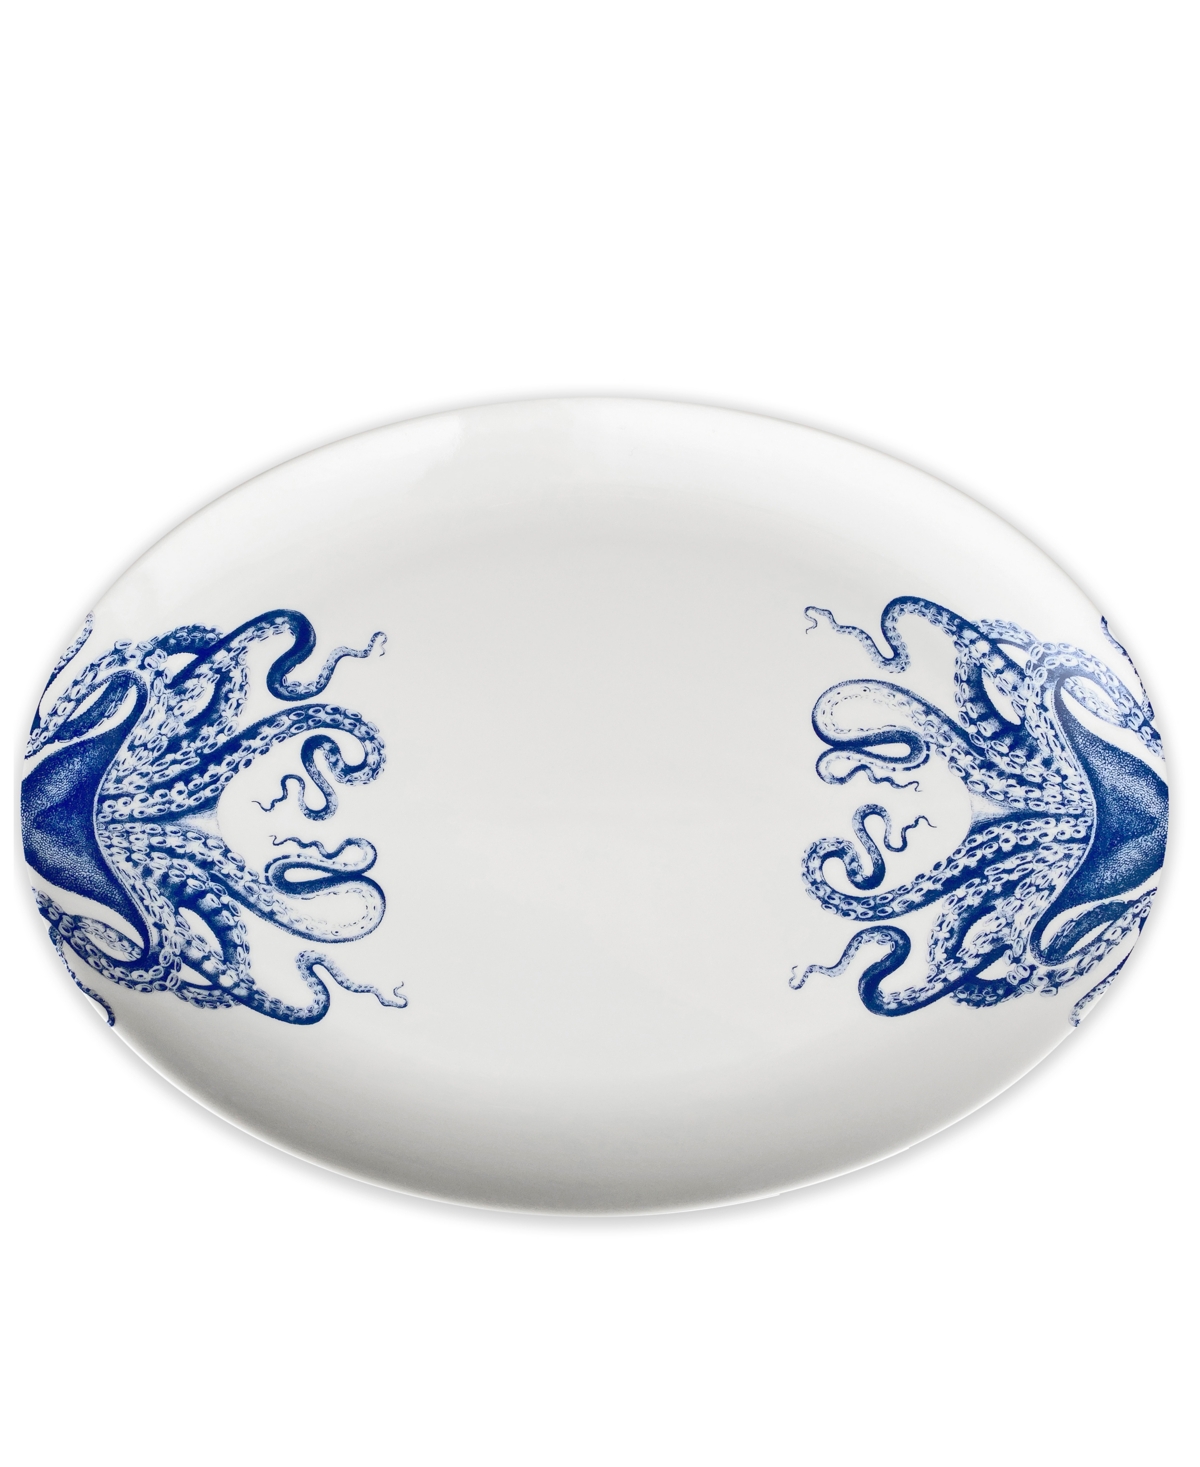 Caskata Lucy Octopus Medium Coupe Oval Platter In Blue On White